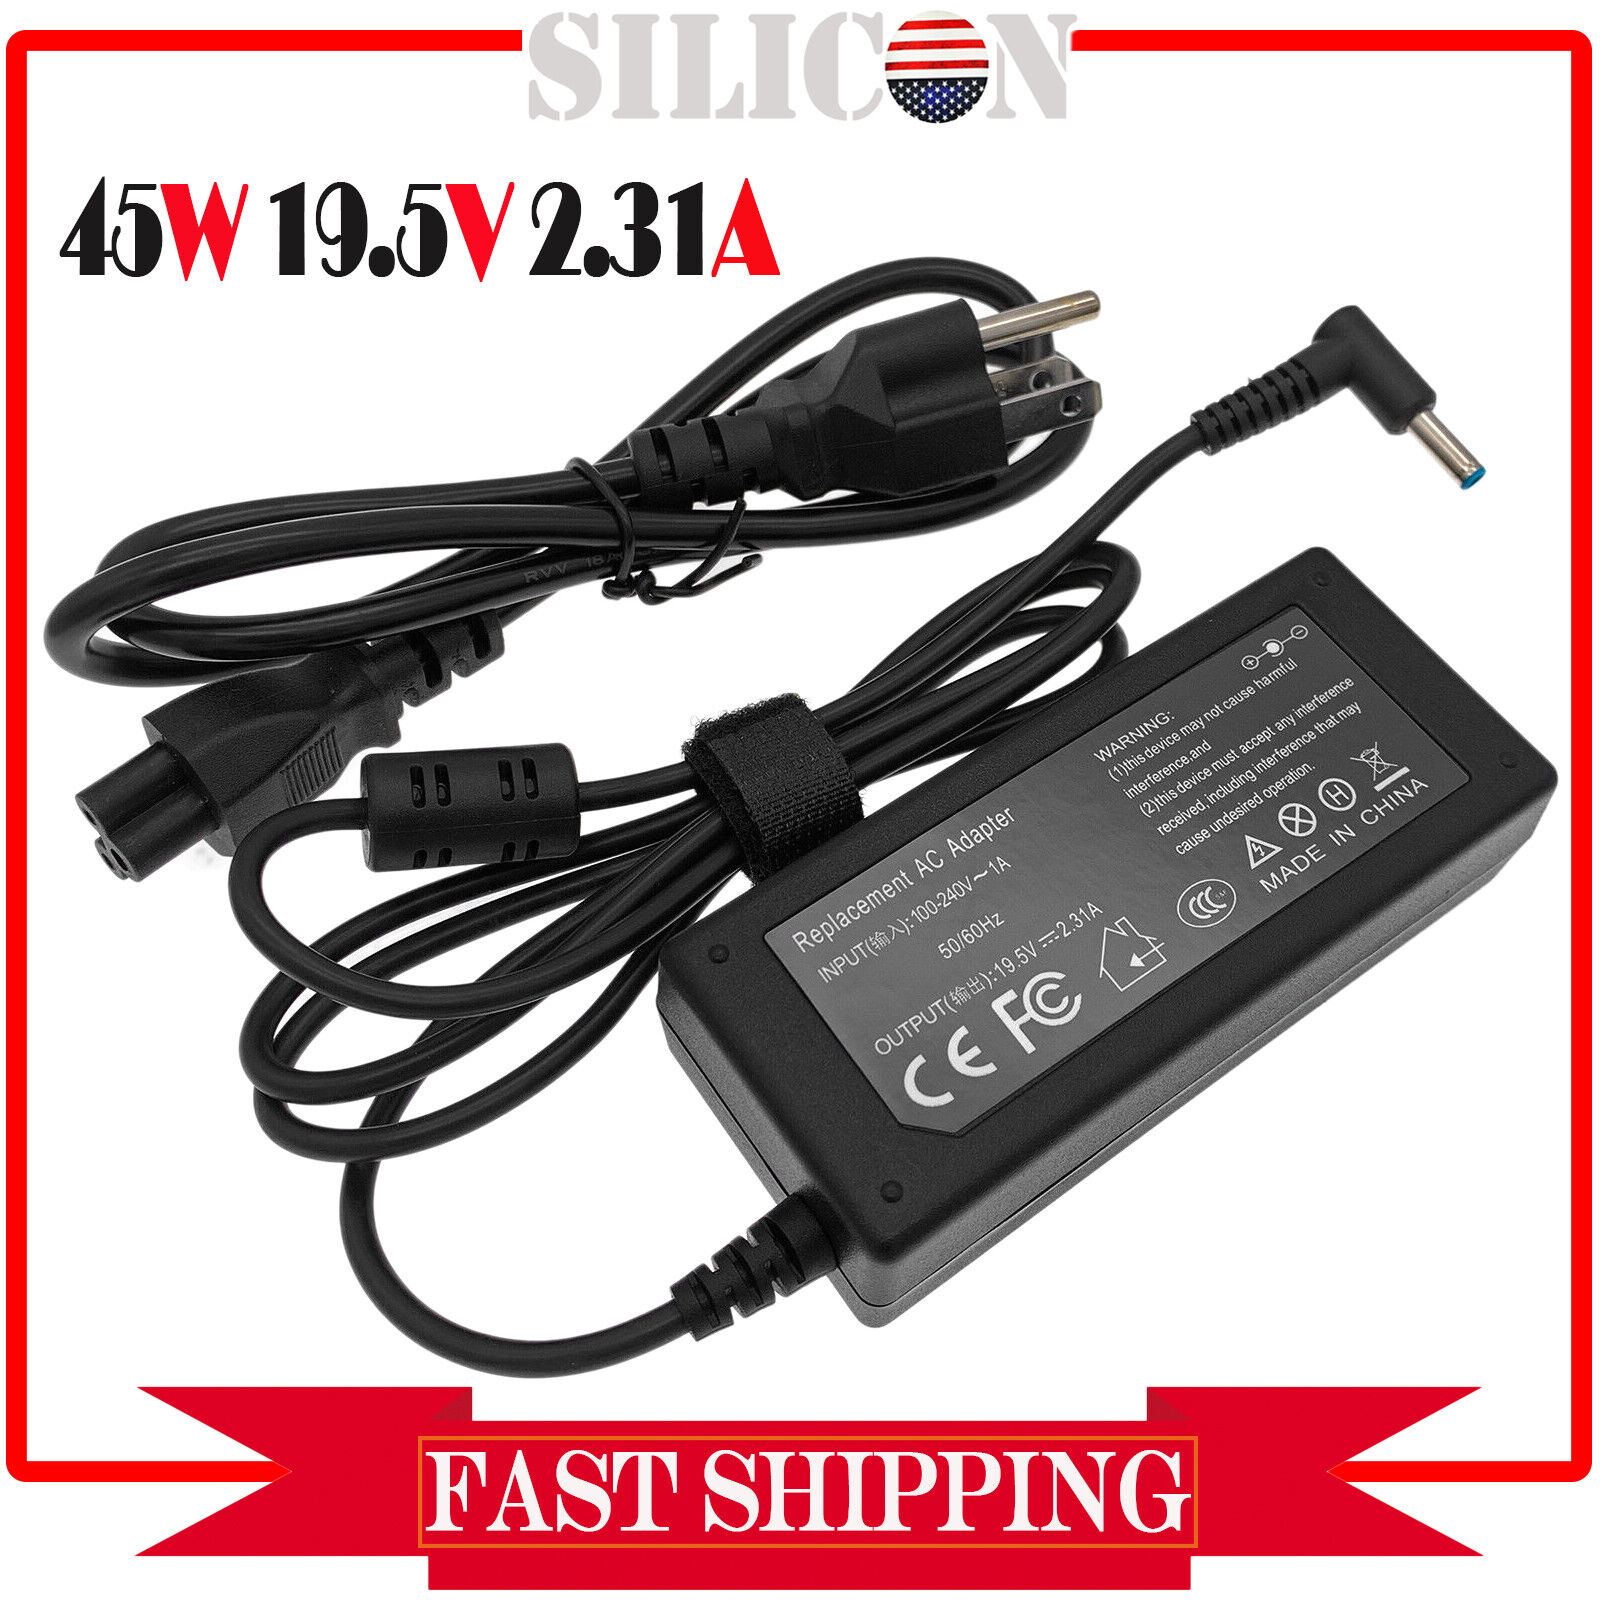 New 45W AC Adapter Power Charger For HP 15-r132wm,740015-002,741727-001 Notebook